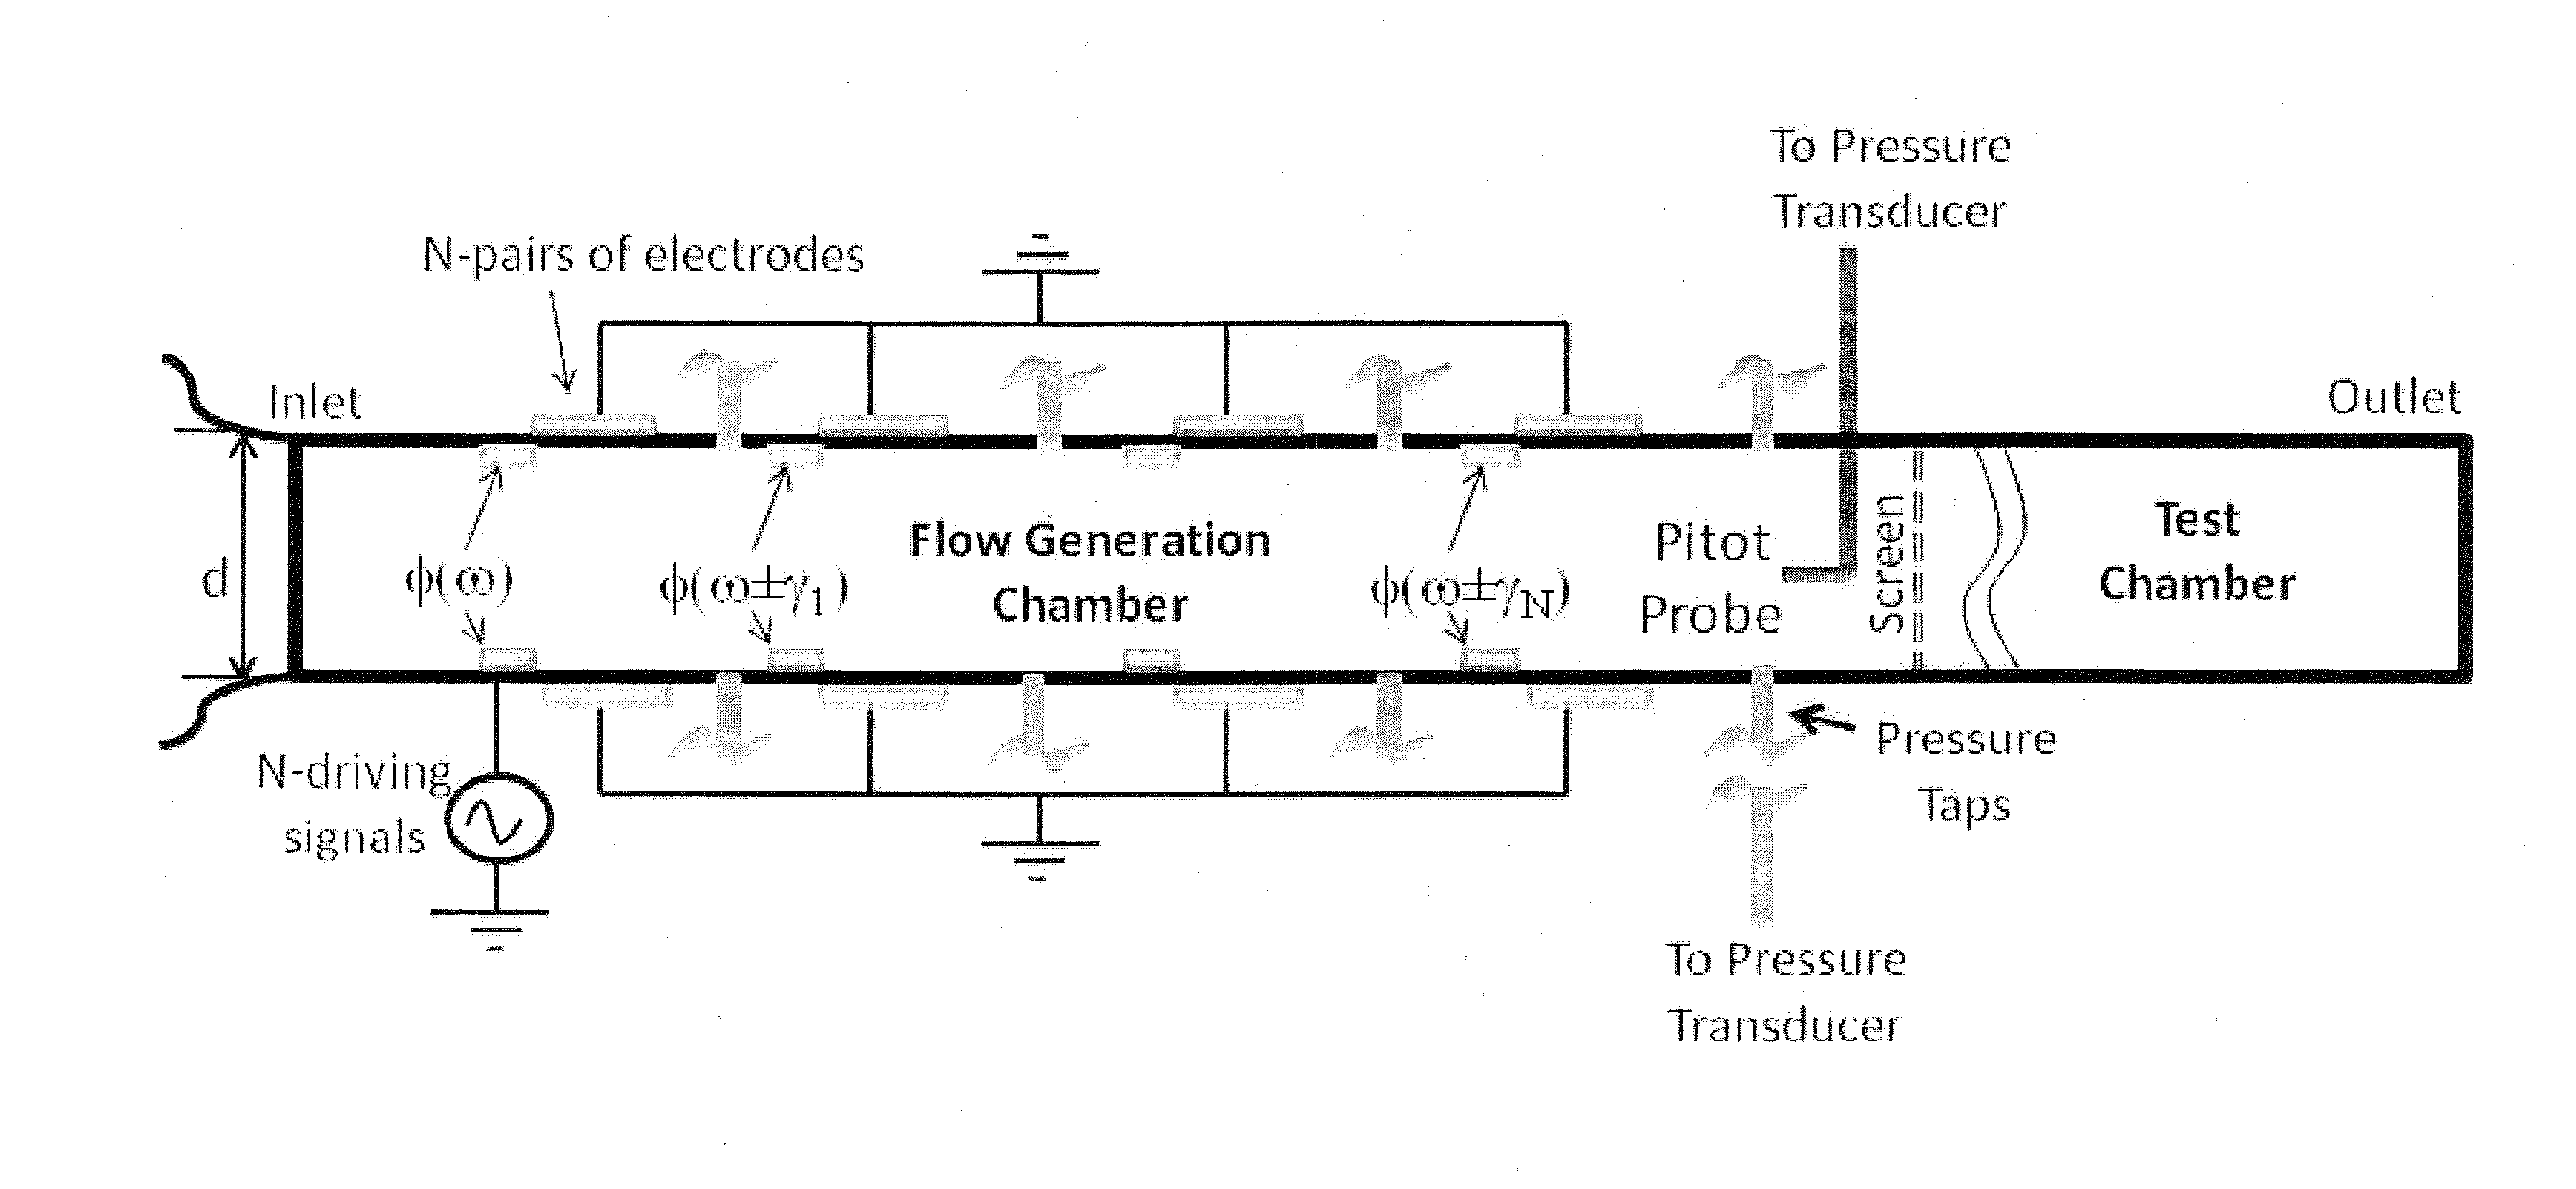 Dielectric barrier discharge wind tunnel